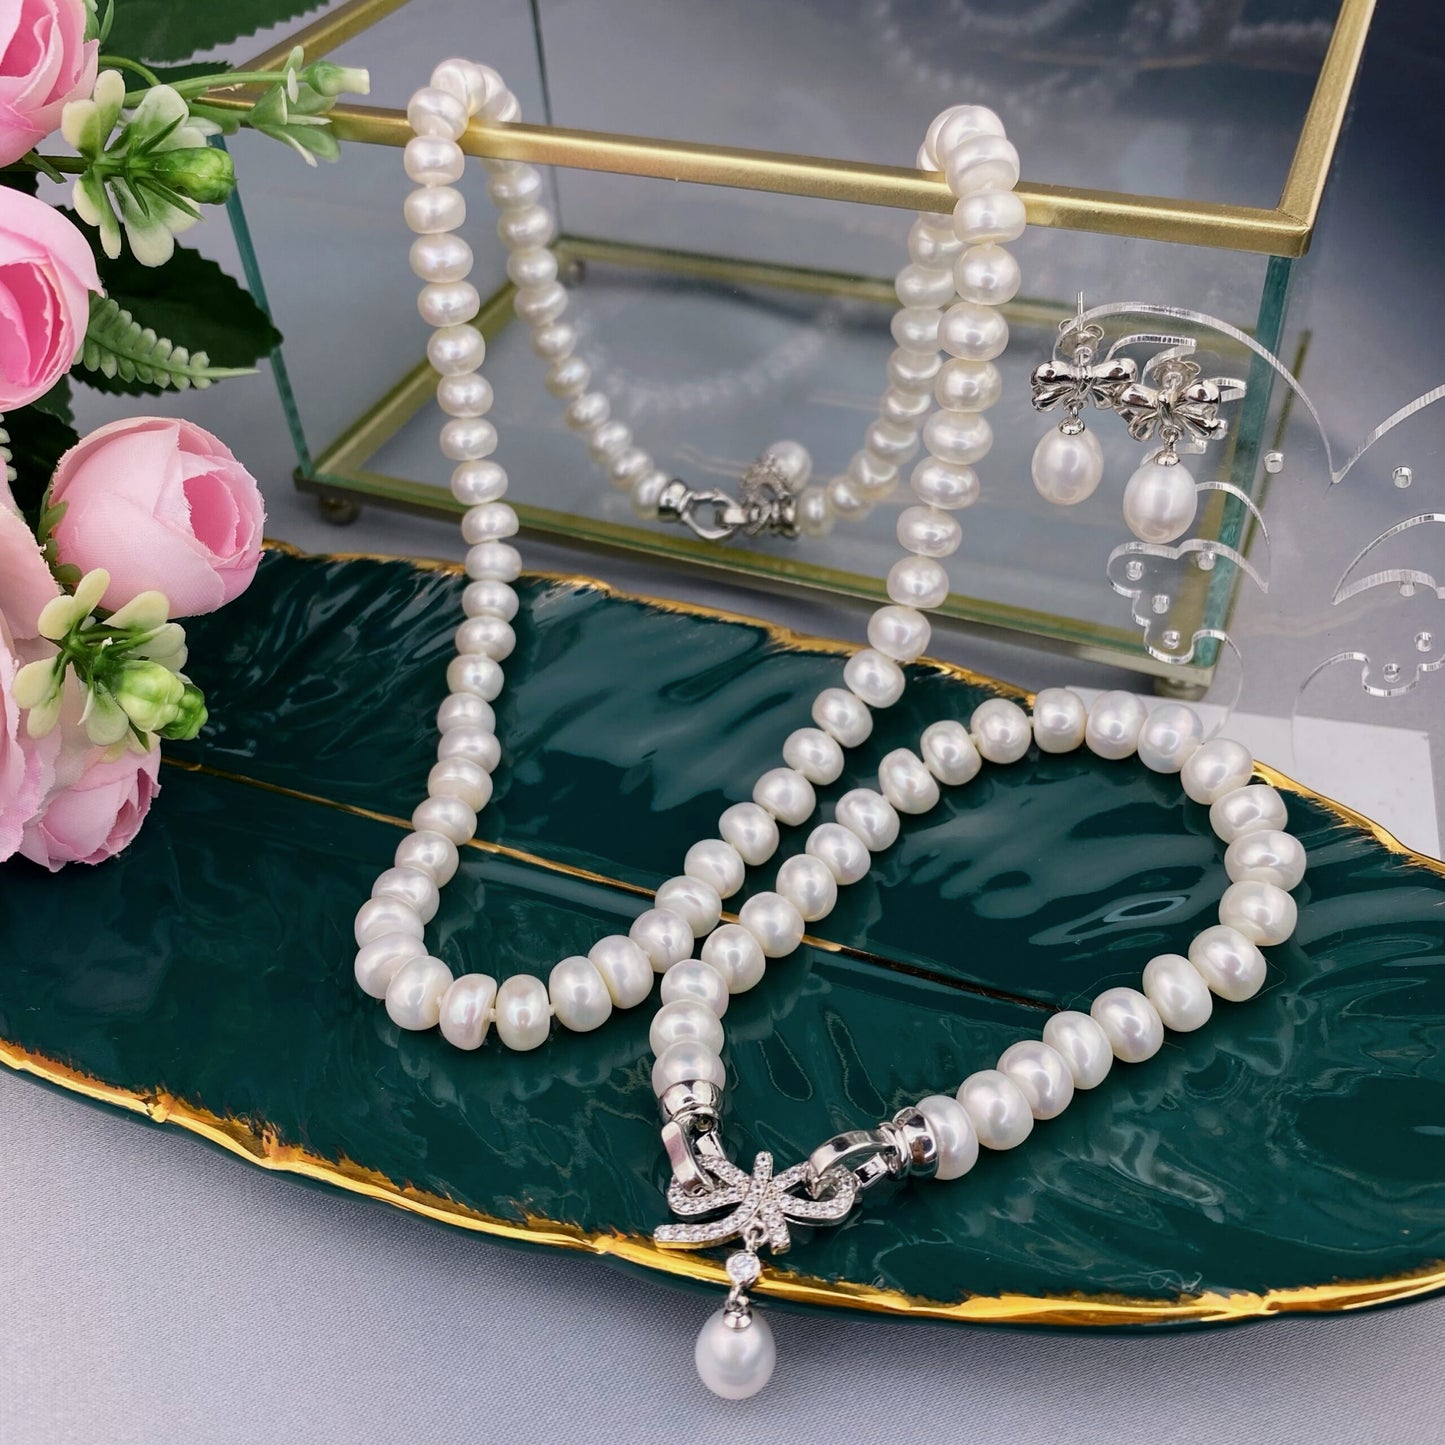 River Pearls set , furniture with embedded crystals